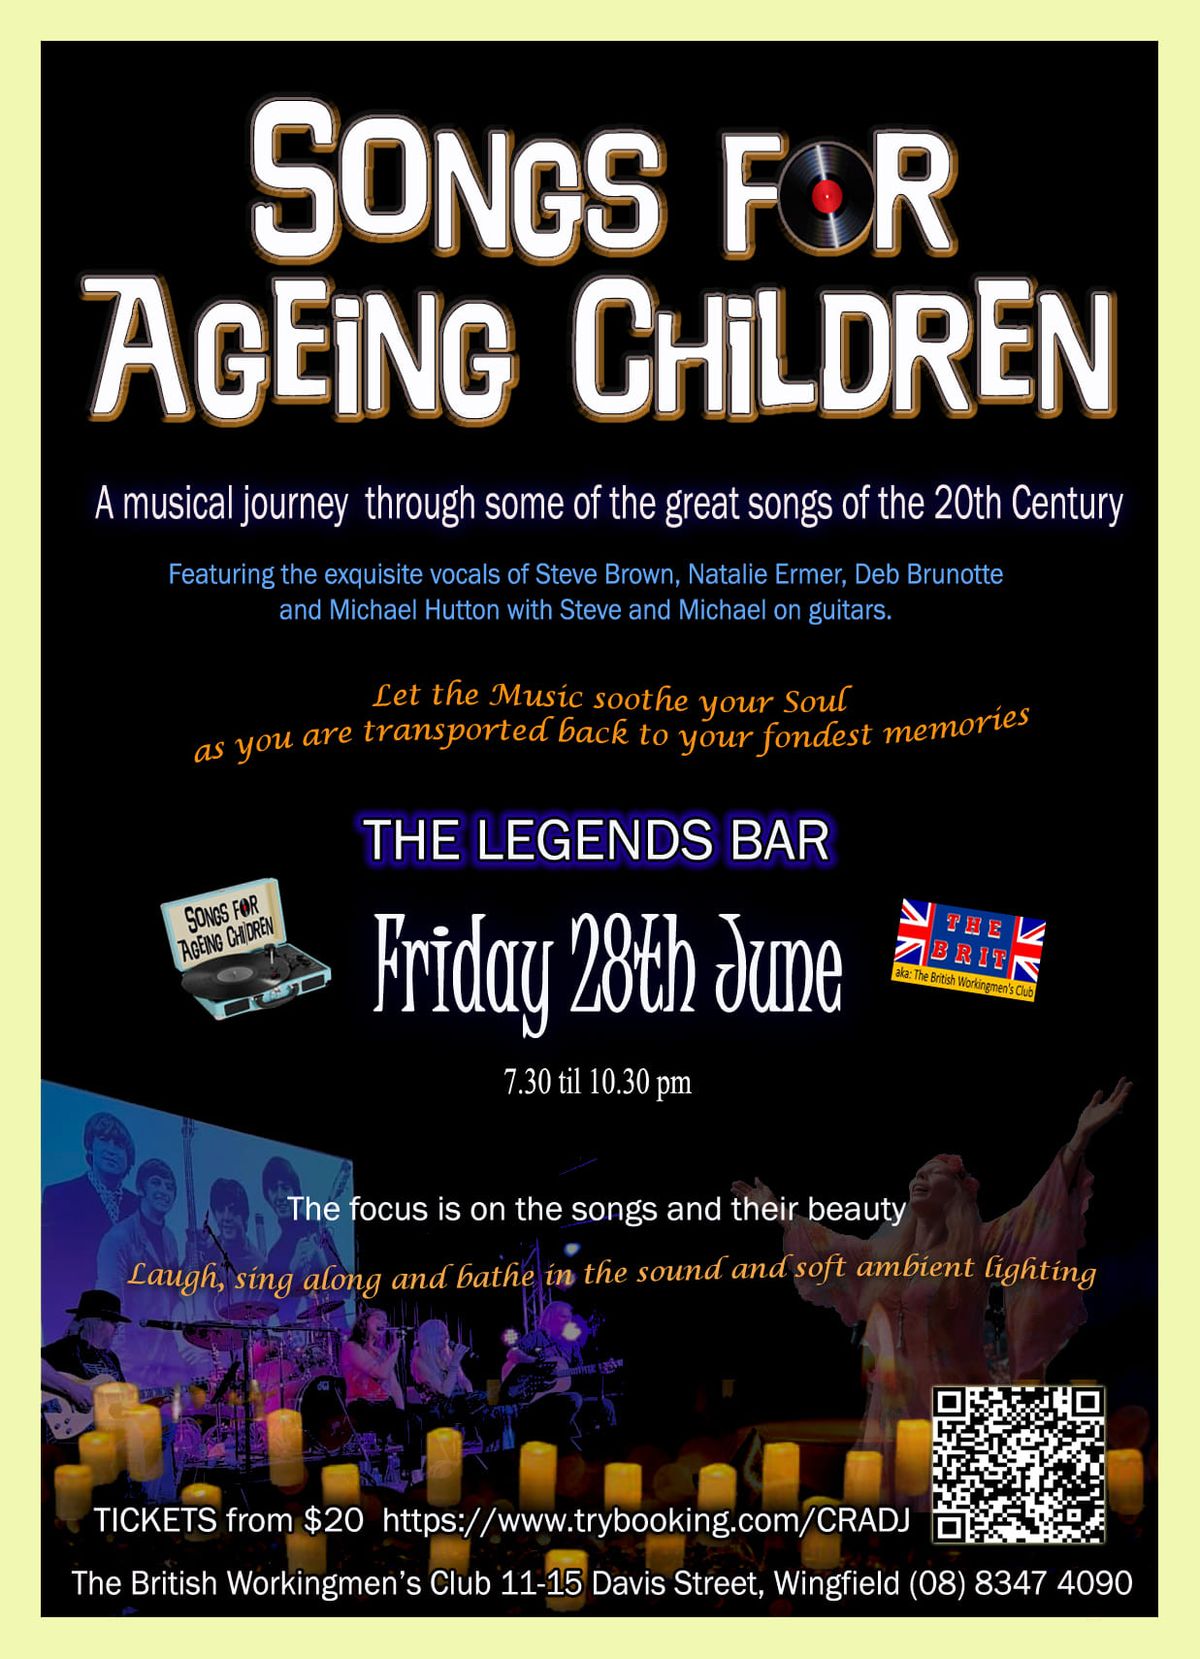 Songs for Ageing Children at The Legends Bar